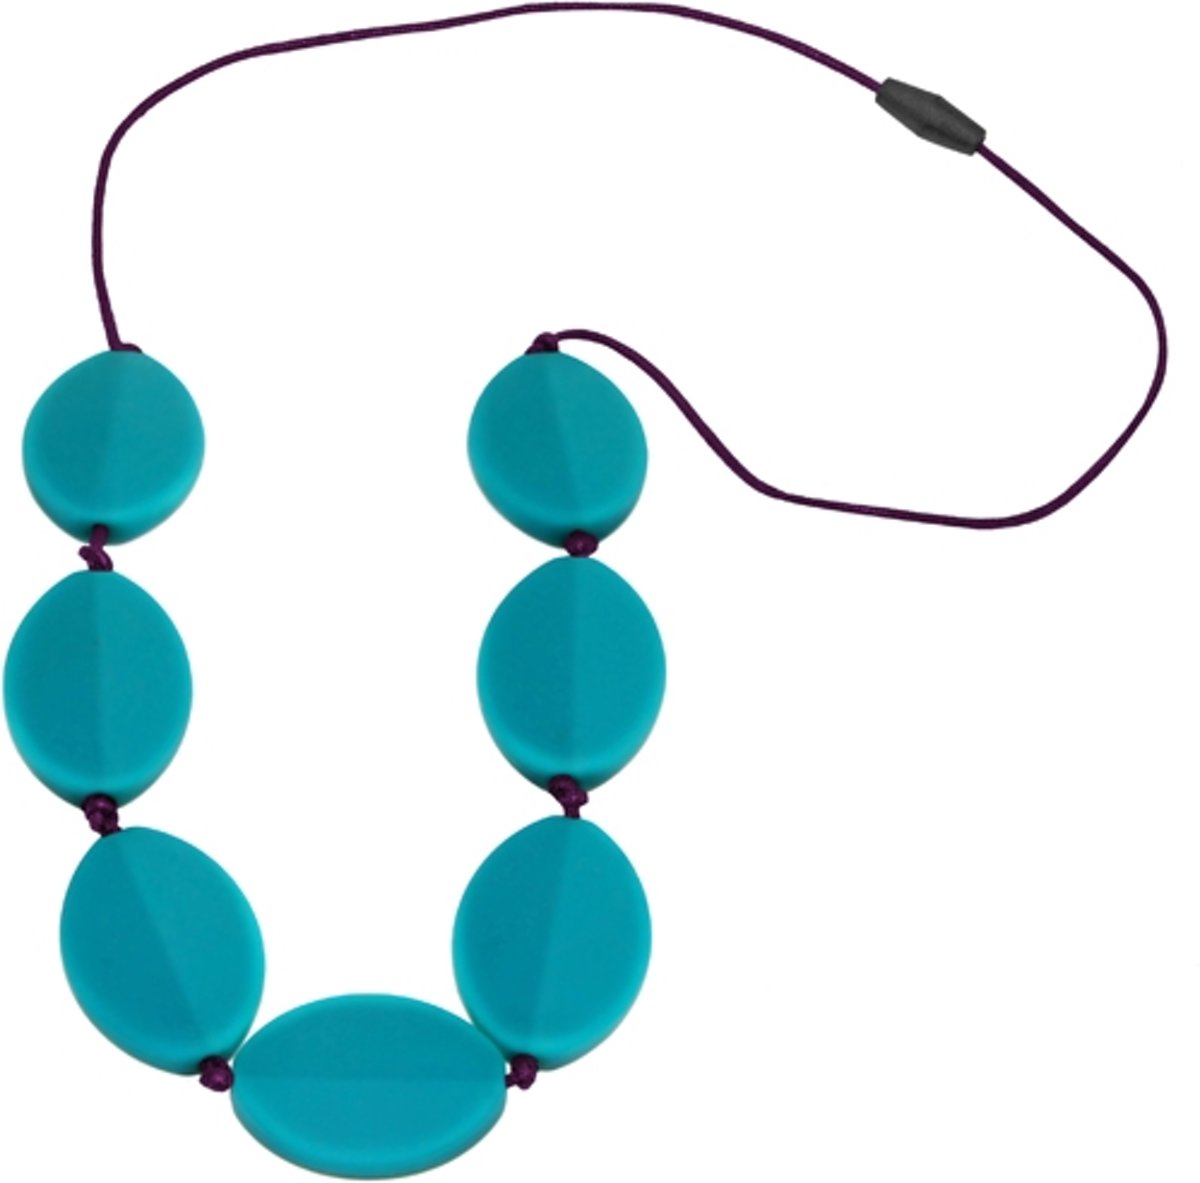 Jellystone Designs Caru Necklace - Kauwketting - Turquoise Baja Green with Eggplant cord